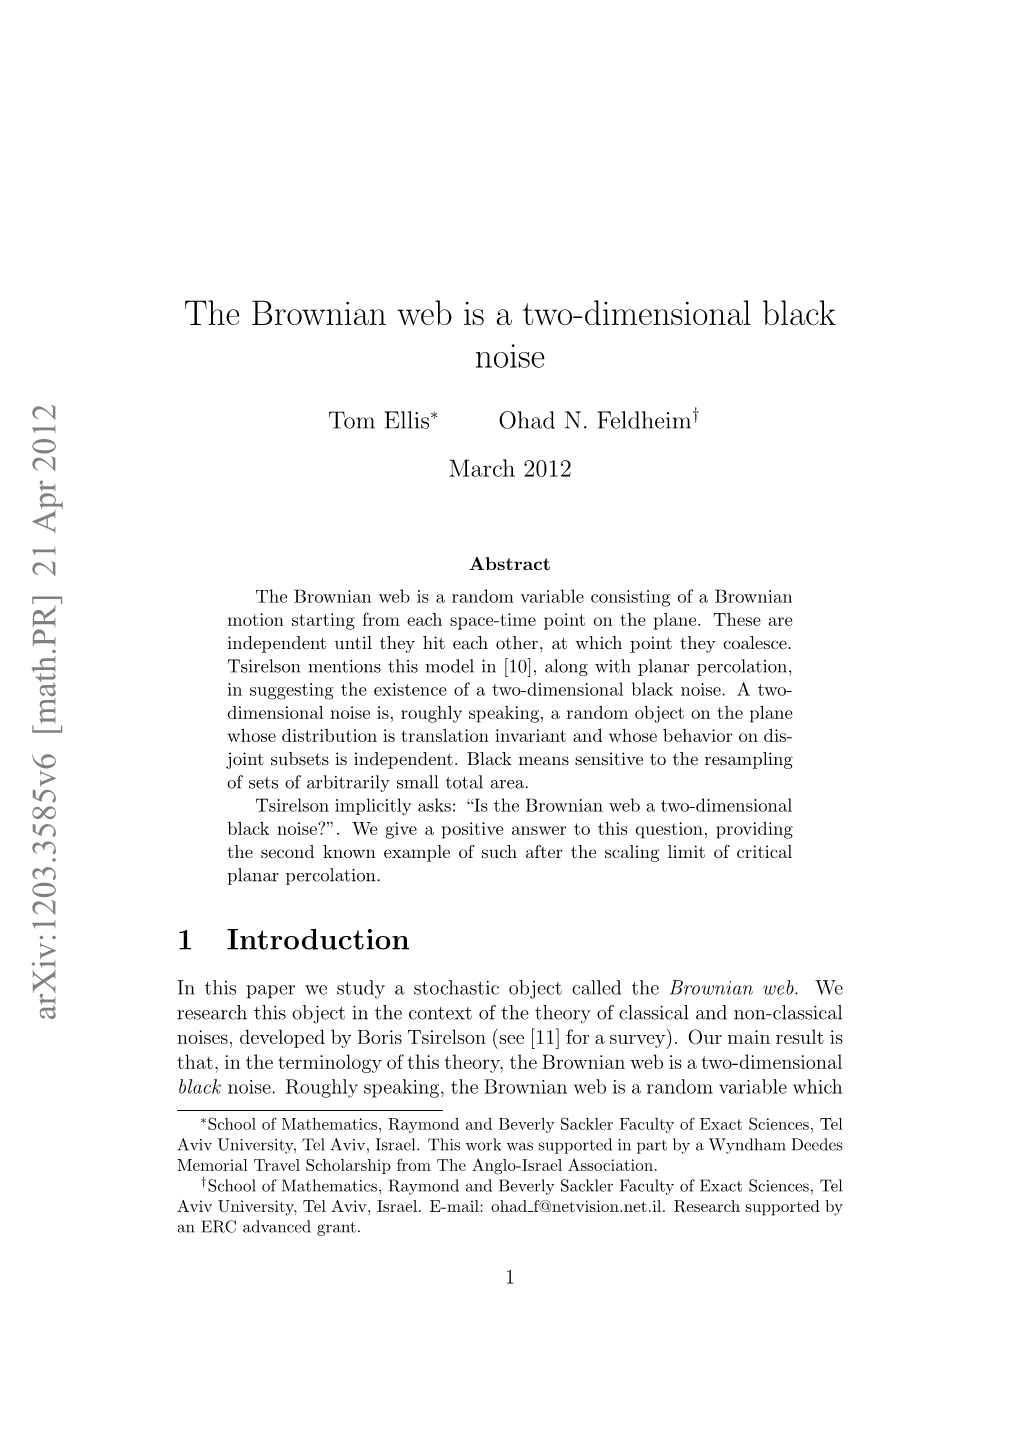 The Brownian Web Is a Two-Dimensional Black Noise